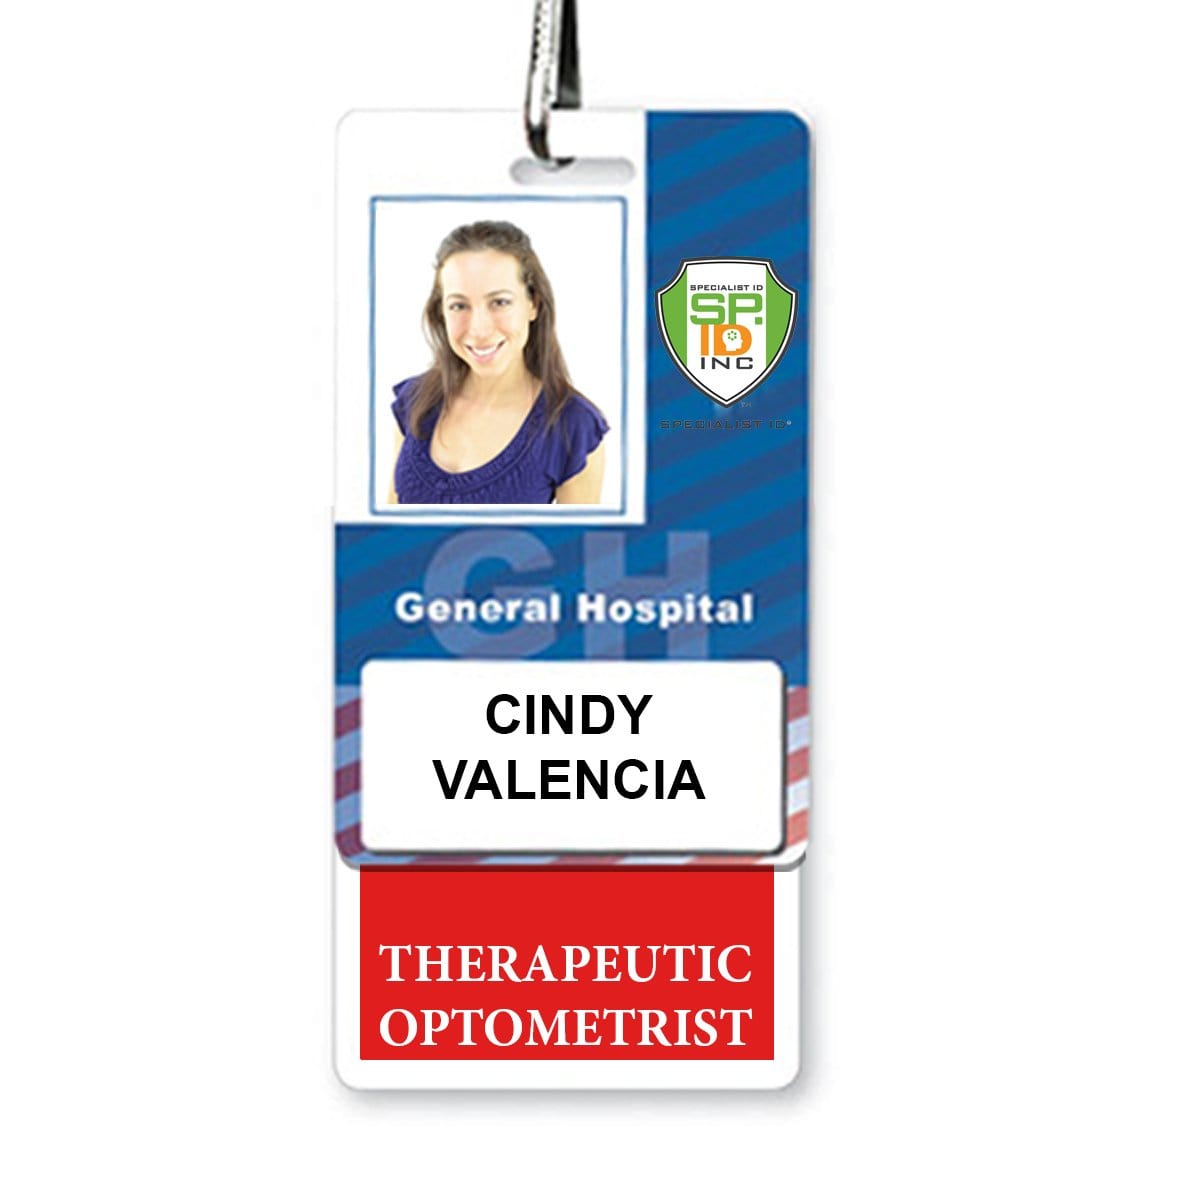 Red "THERAPEUTIC OPTOMETRIST" Vertical Badge Buddy with Red Border BB-THERAPEUTICOPTOMETRIS-RED-V